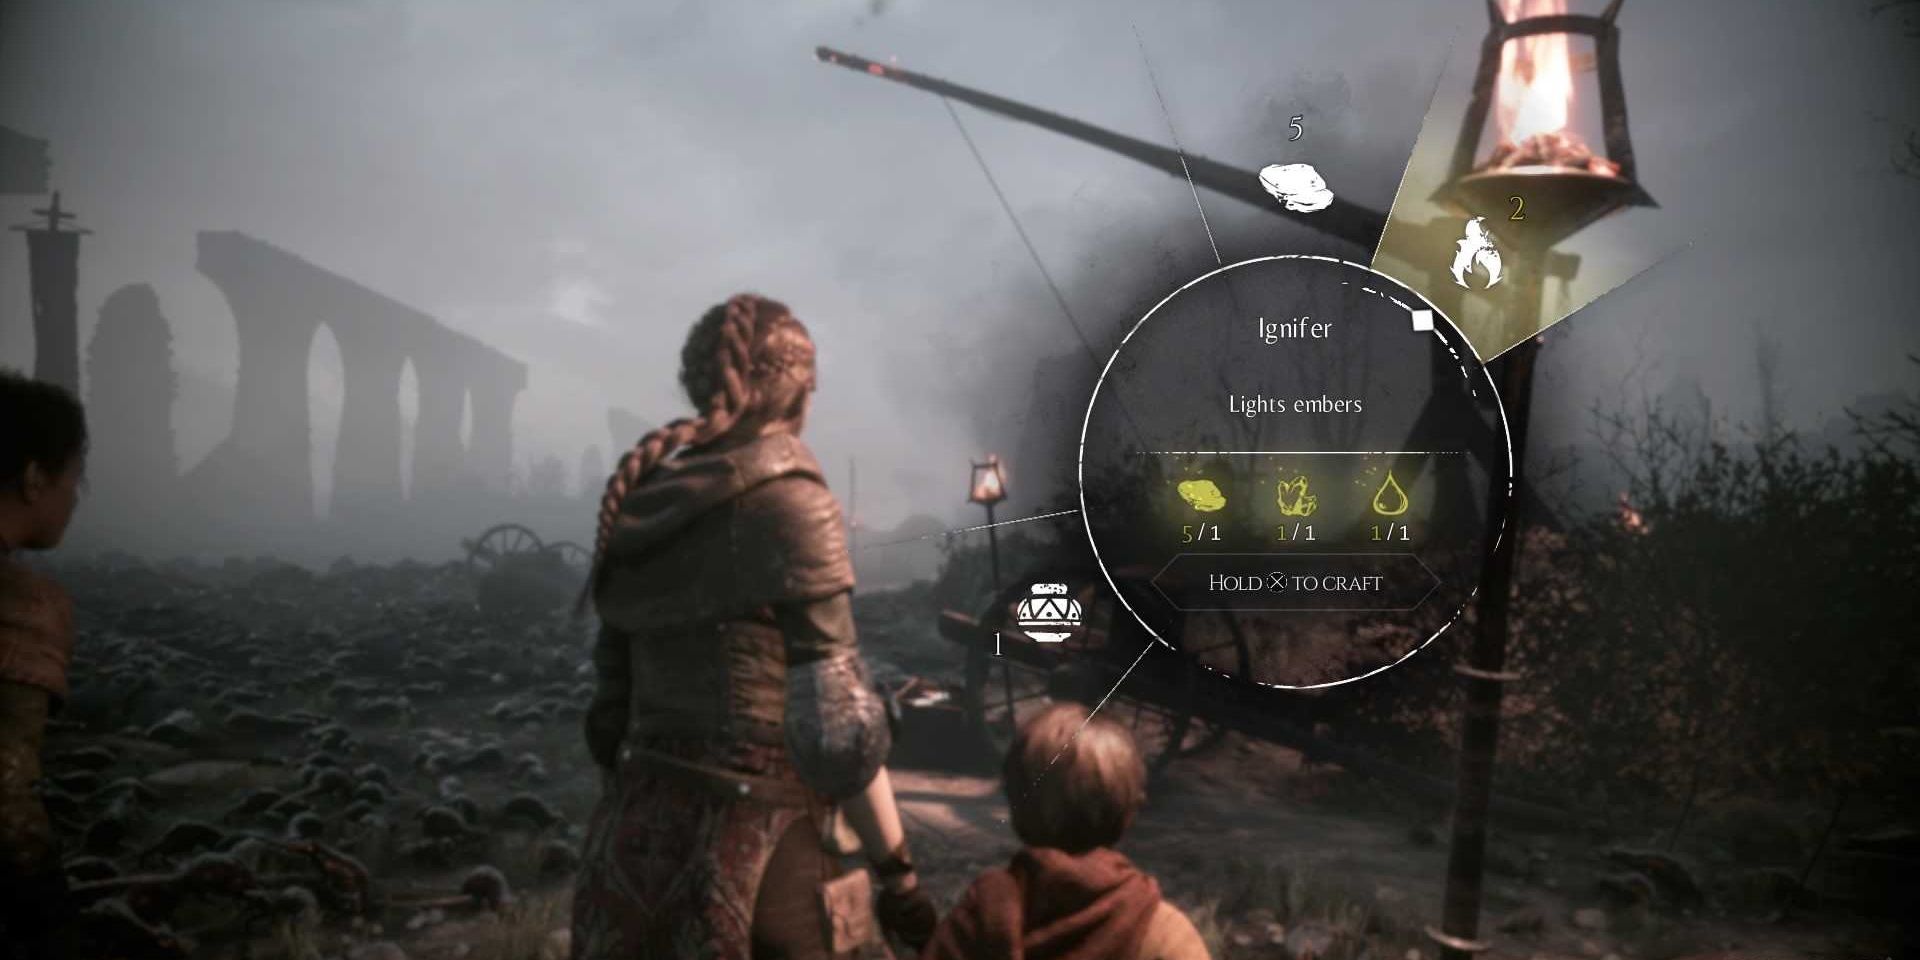 Ignifer Projectile From A Plague Tale Innocence